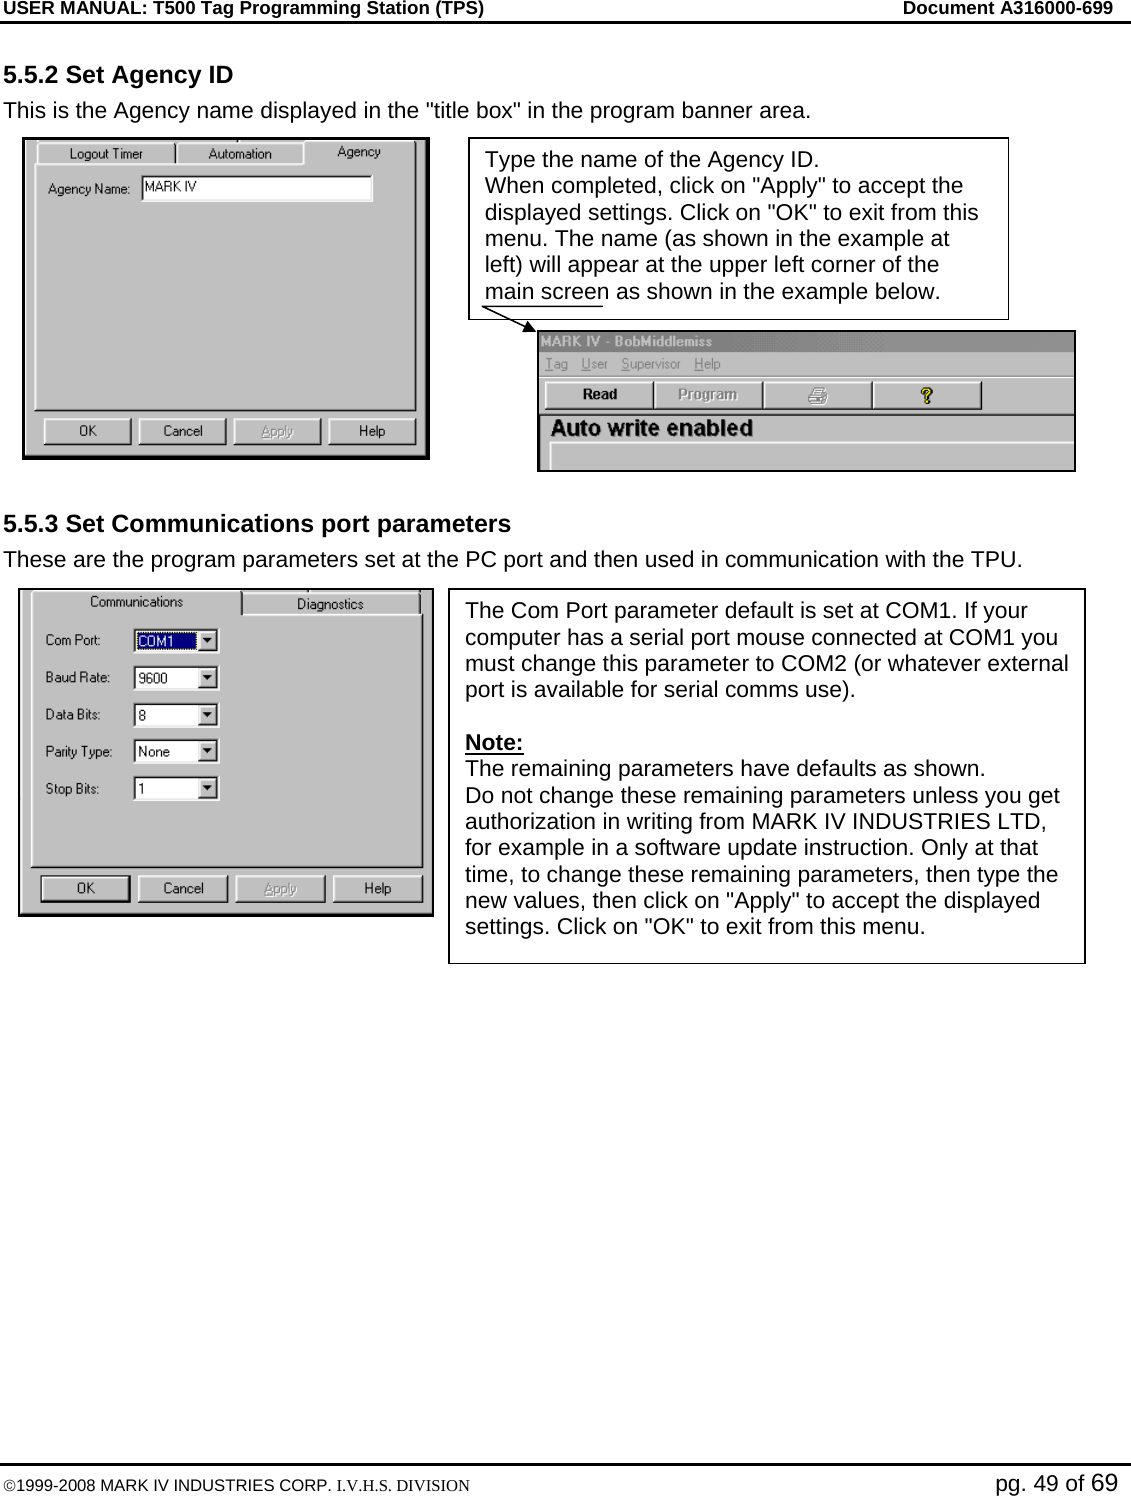 USER MANUAL: T500 Tag Programming Station (TPS)     Document A316000-699  ©1999-2008 MARK IV INDUSTRIES CORP. I.V.H.S. DIVISION   pg. 49 of 69 5.5.2 Set Agency ID This is the Agency name displayed in the &quot;title box&quot; in the program banner area.  5.5.3 Set Communications port parameters These are the program parameters set at the PC port and then used in communication with the TPU.   Type the name of the Agency ID. When completed, click on &quot;Apply&quot; to accept the displayed settings. Click on &quot;OK&quot; to exit from this menu. The name (as shown in the example at left) will appear at the upper left corner of the main screen as shown in the example below. The Com Port parameter default is set at COM1. If your computer has a serial port mouse connected at COM1 you must change this parameter to COM2 (or whatever external port is available for serial comms use).  Note: The remaining parameters have defaults as shown. Do not change these remaining parameters unless you get authorization in writing from MARK IV INDUSTRIES LTD, for example in a software update instruction. Only at that time, to change these remaining parameters, then type the new values, then click on &quot;Apply&quot; to accept the displayed settings. Click on &quot;OK&quot; to exit from this menu. 